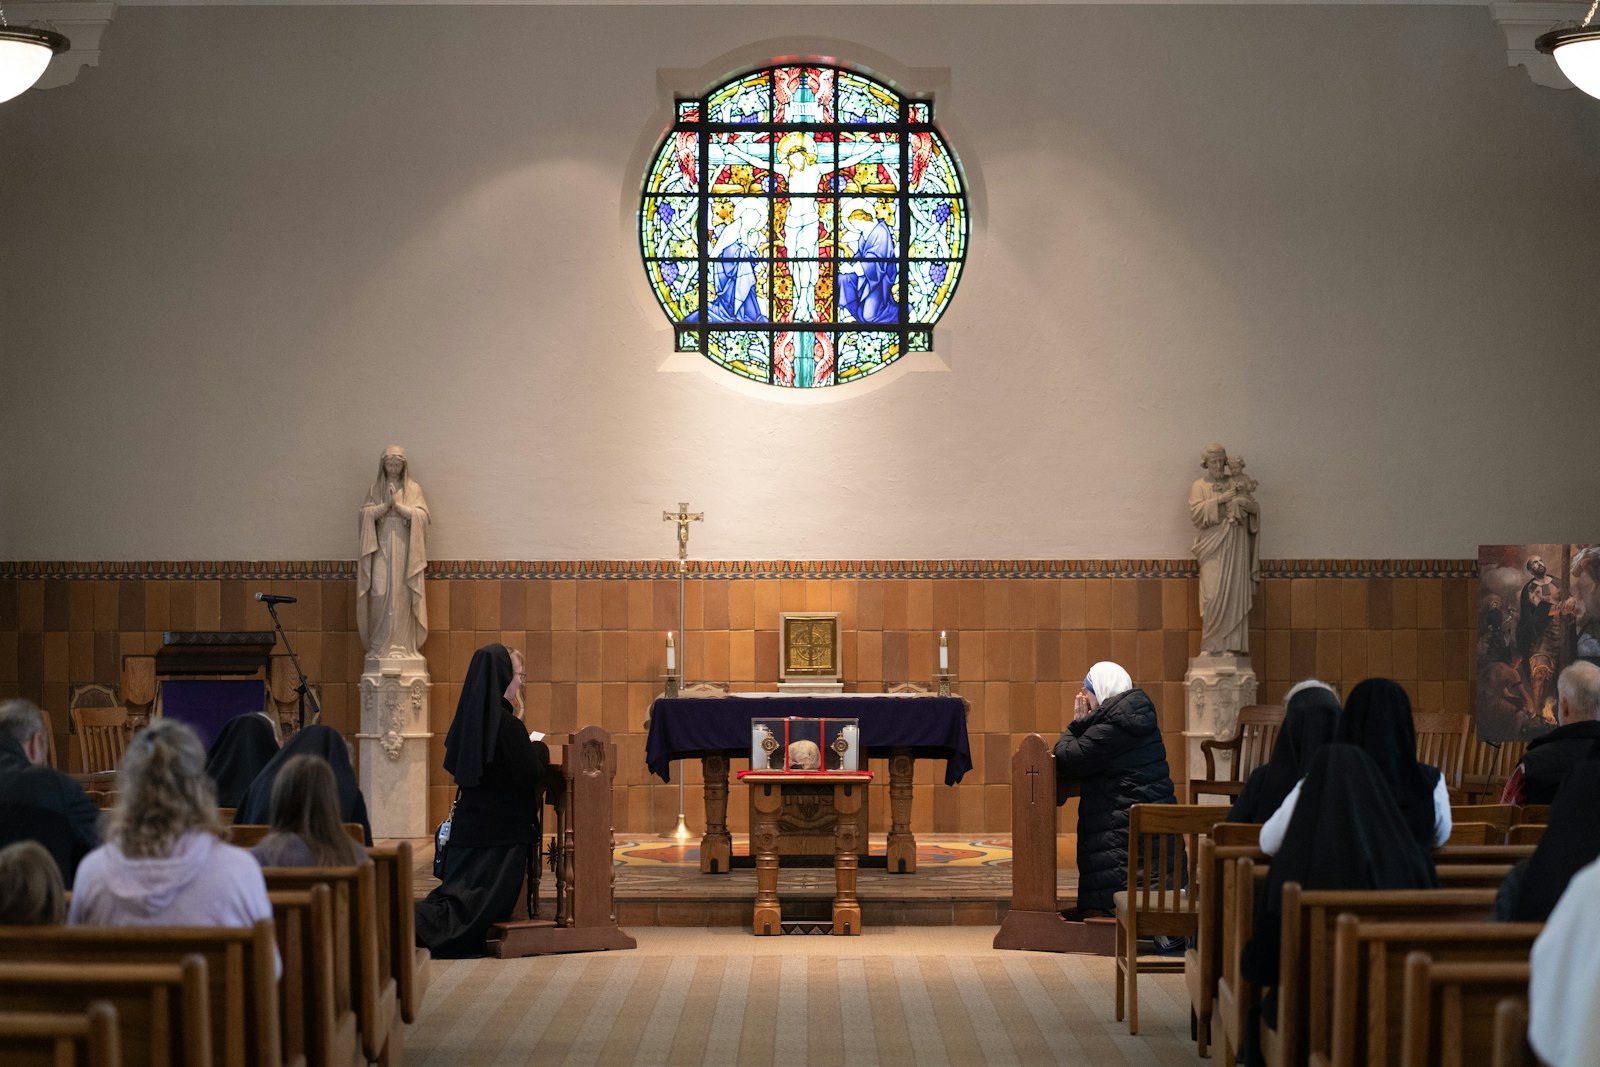 The Chapel of the North American Martyrs on the campus of University of Detroit Jesuit High School was built in 1930, when the North American Martyrs were canonized, making the chapel one of the first building in the world dedicated to the North American Martyrs, said school president, Bro. Jim Boynton, SJ.